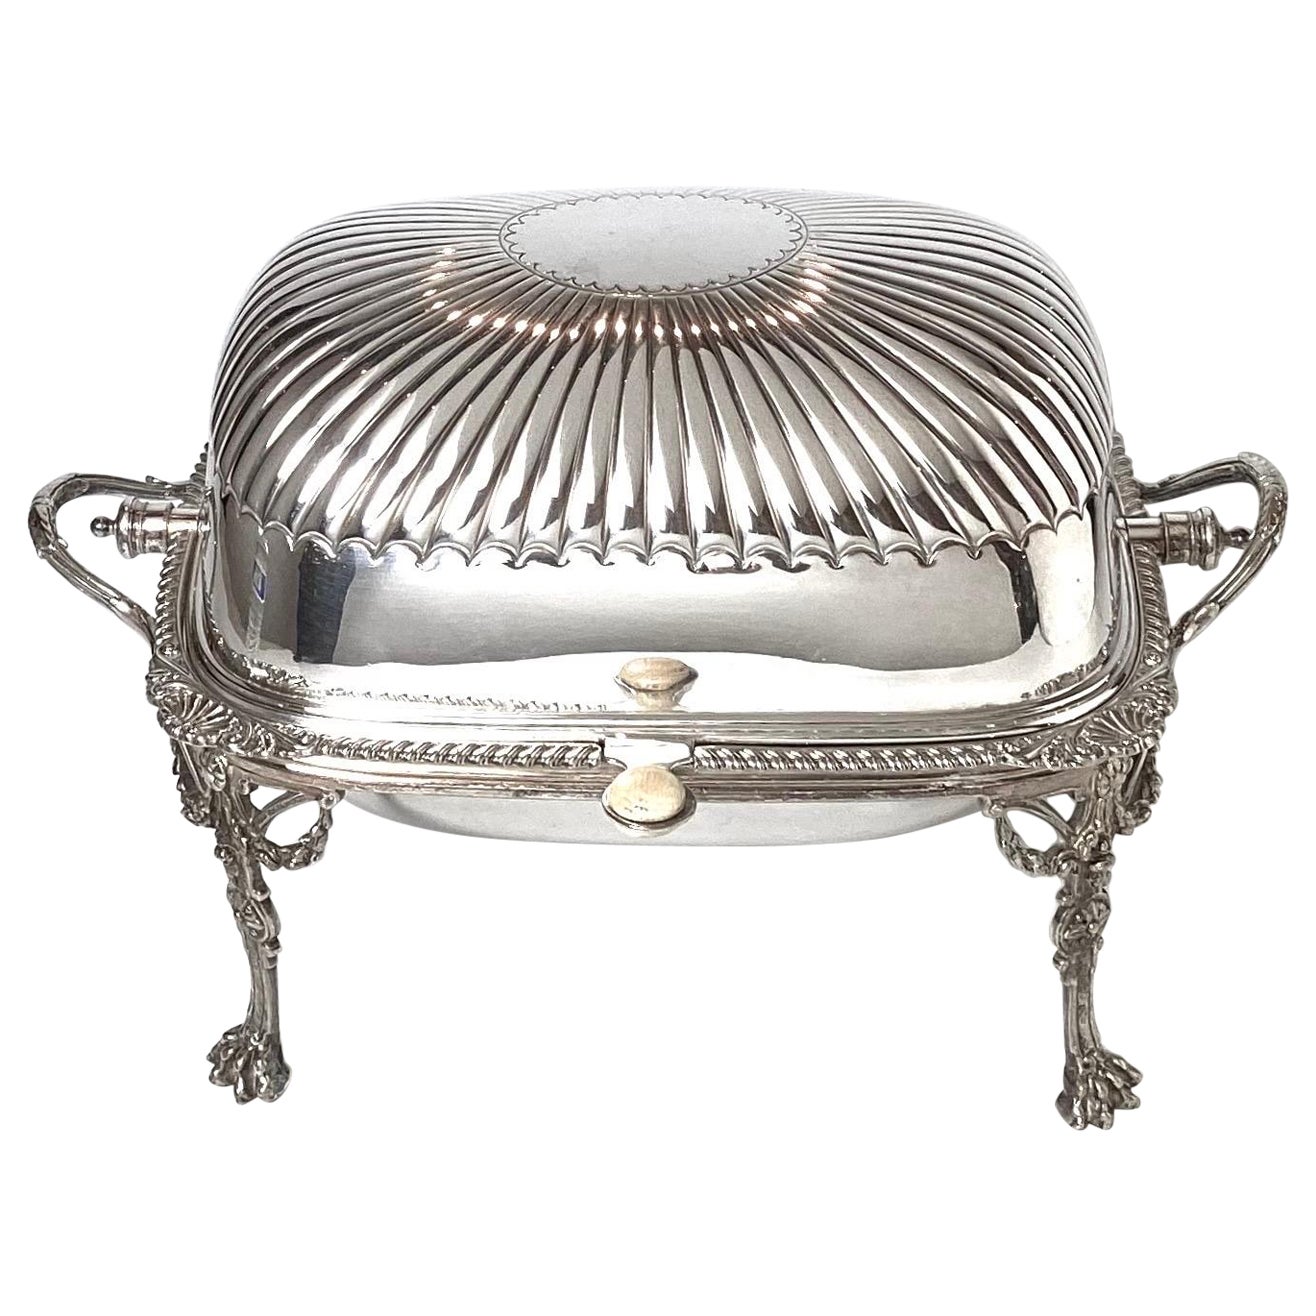 And English Domed Top Entrée Server Silver Plate 